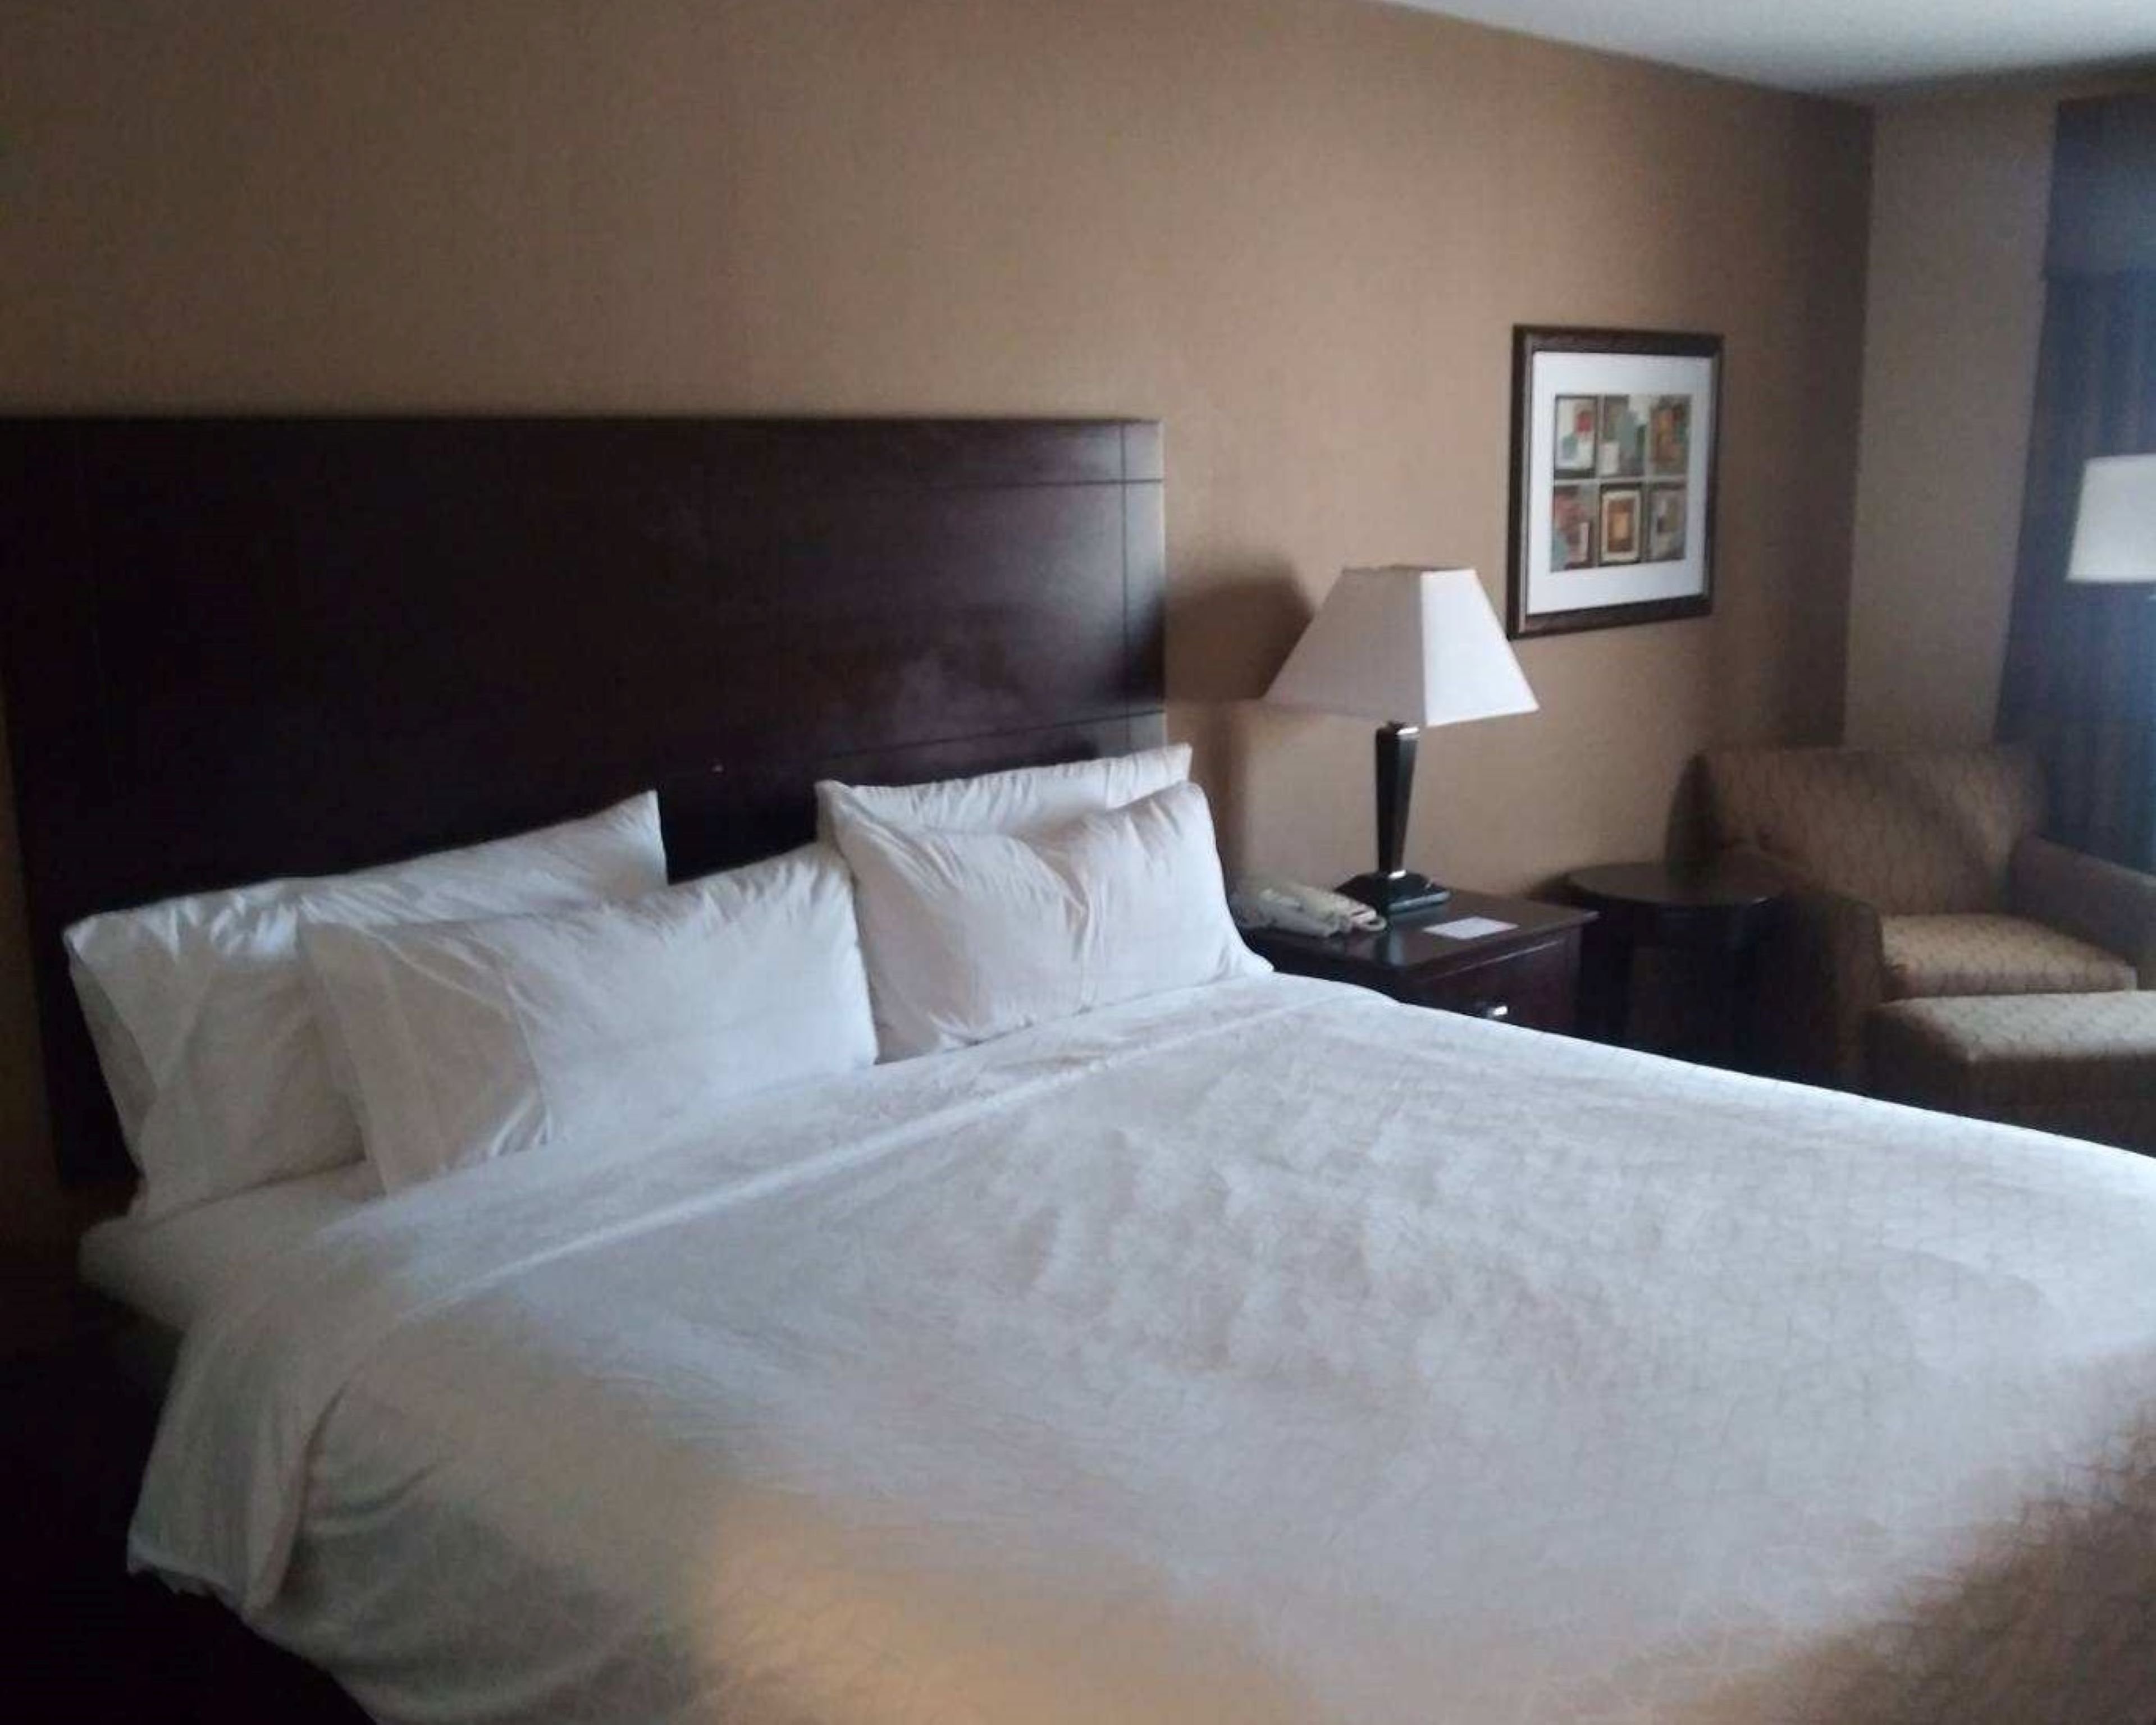 Enjoy a comfortable stay in our King Bed guest room.